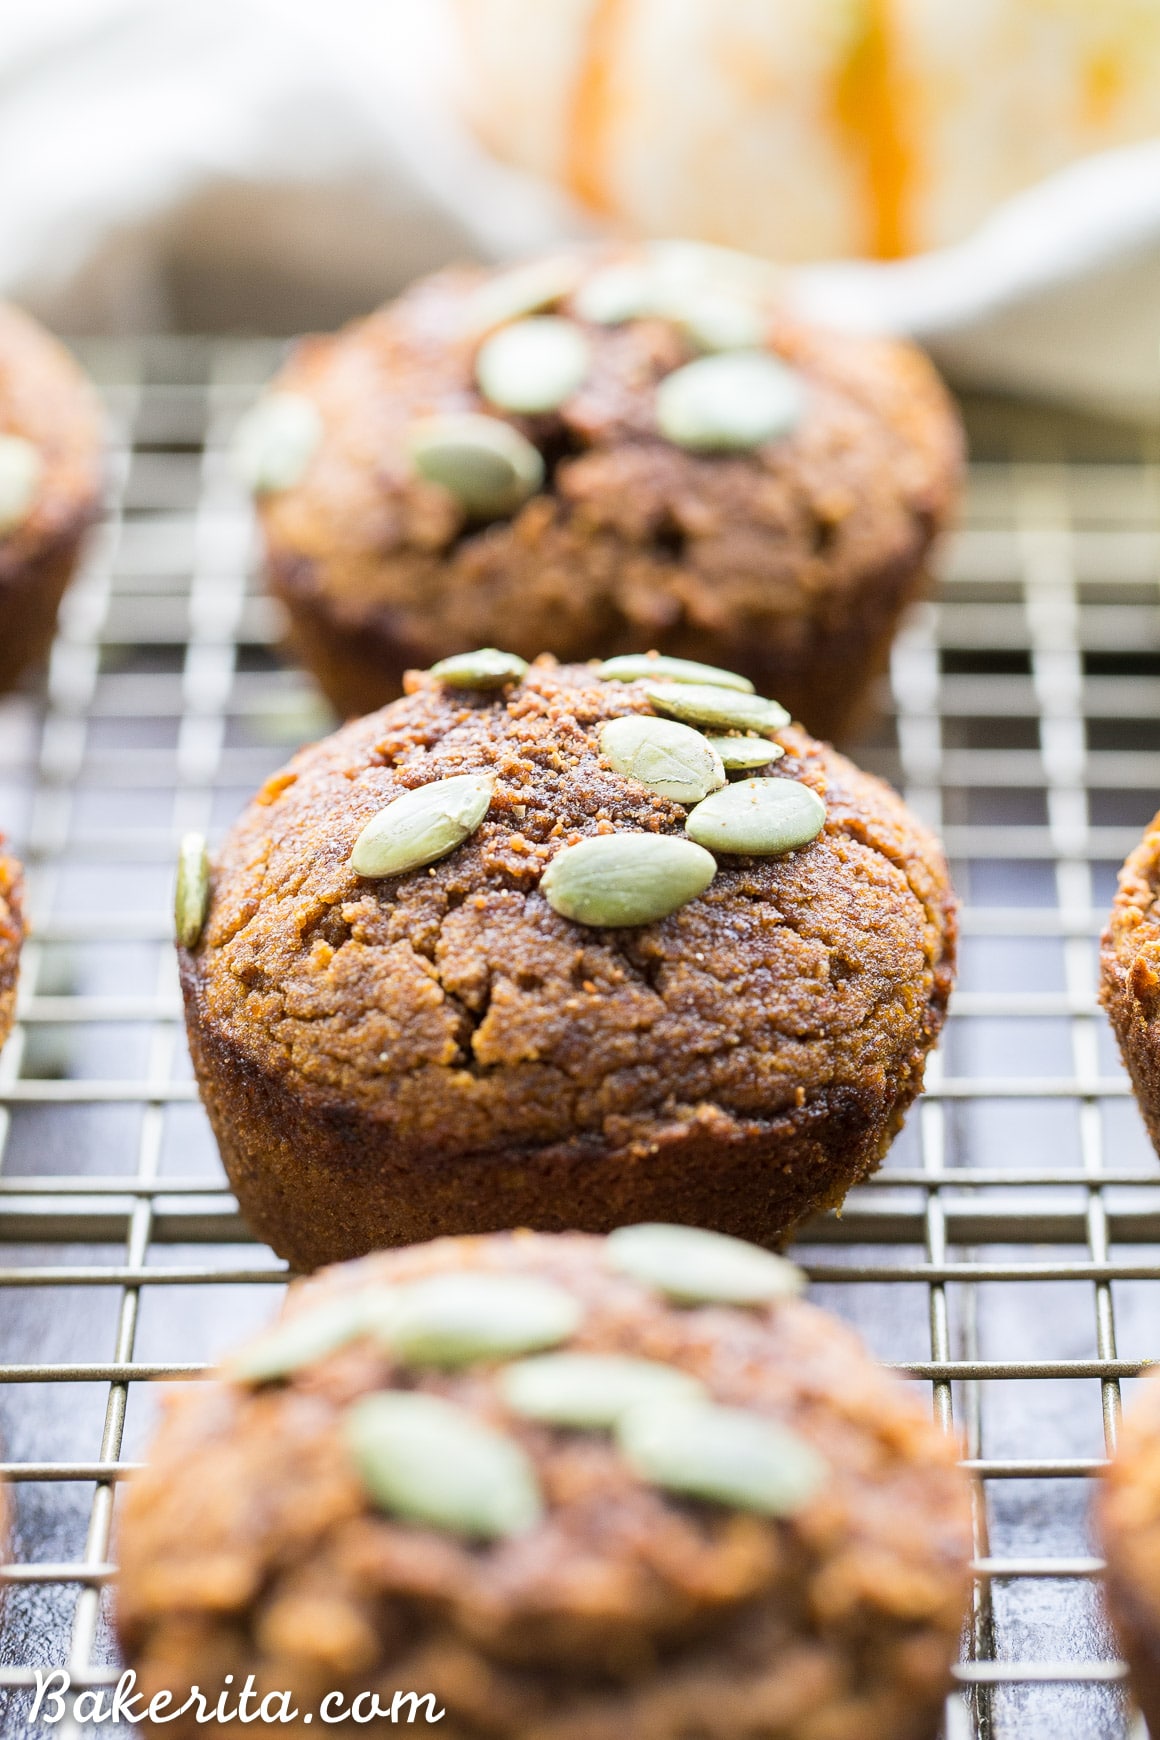 These Paleo Pumpkin Muffins, made with coconut flour and almond butter, are moist, fluffy, and lightly spiced with cinnamon and nutmeg. These healthy muffins make a great breakfast or snack and freeze well.